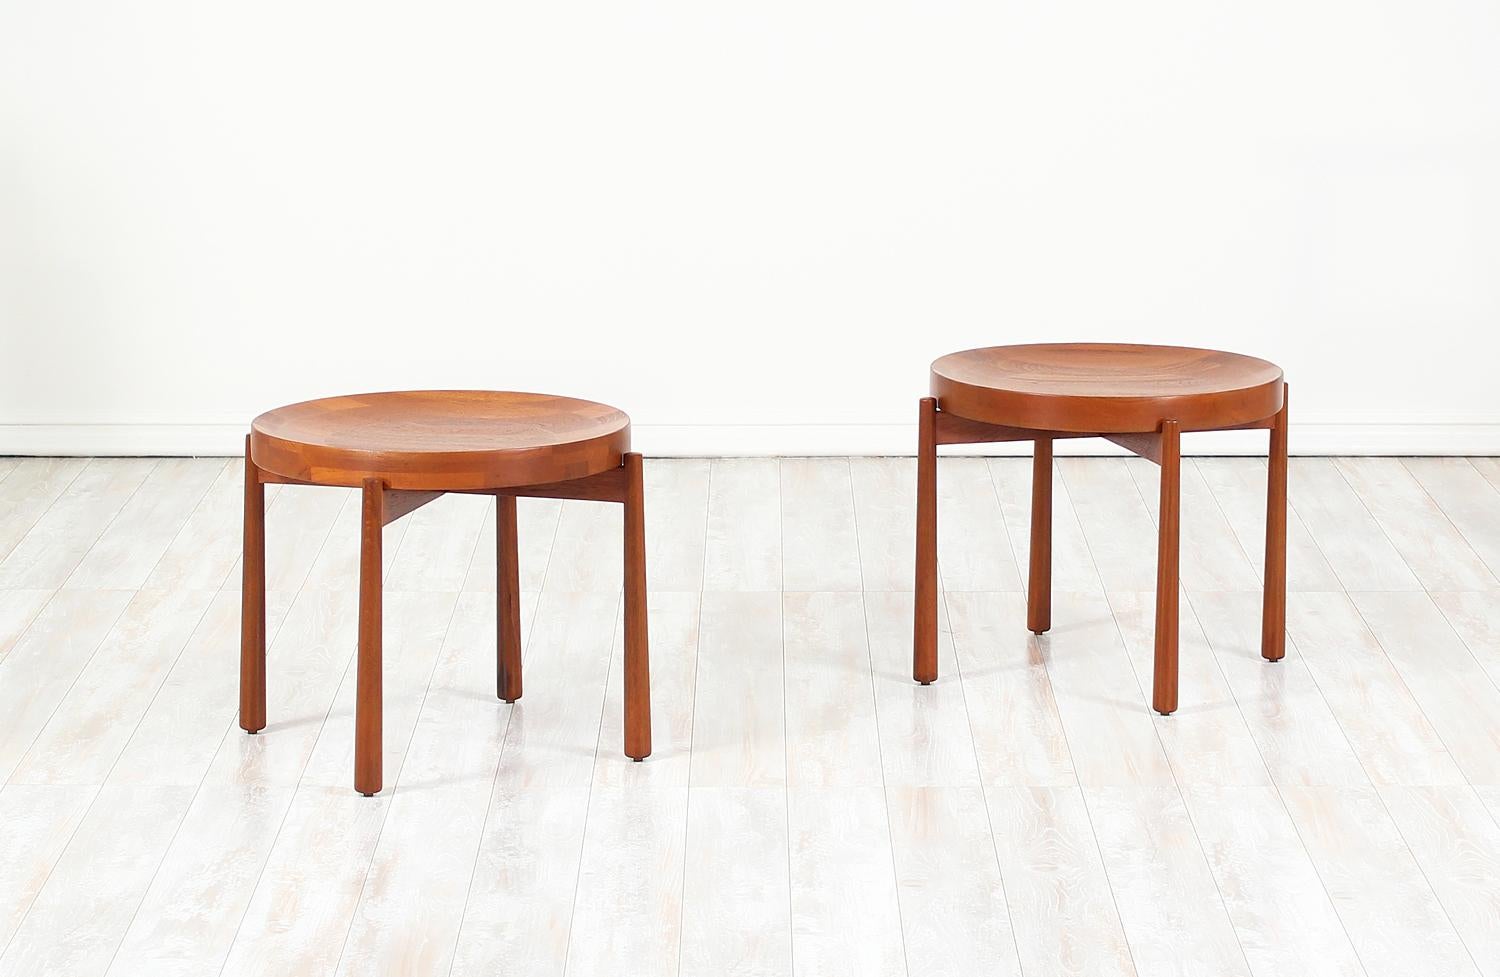 Pair of reversible tray top side tables designed and manufactured by Dux of Sweden circa 1960’s. This extraordinary design is comprised of teak wood with four sturdy tapered legs that support the removable/reversible tabletop tray. Originally